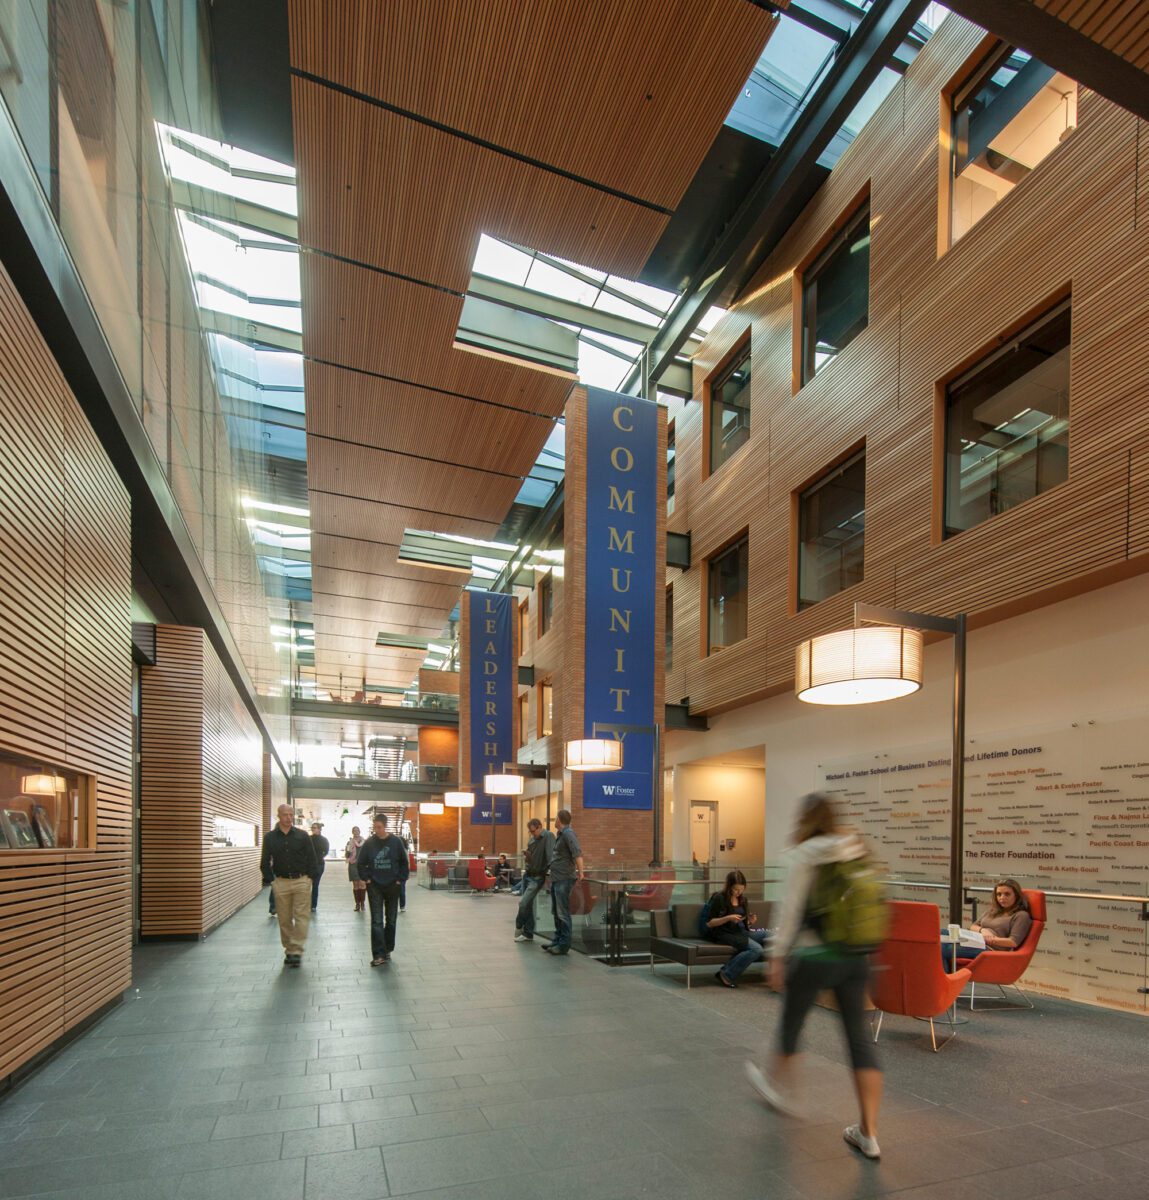 PACCAR Hall, Foster School of Business, University of Washington - Interior